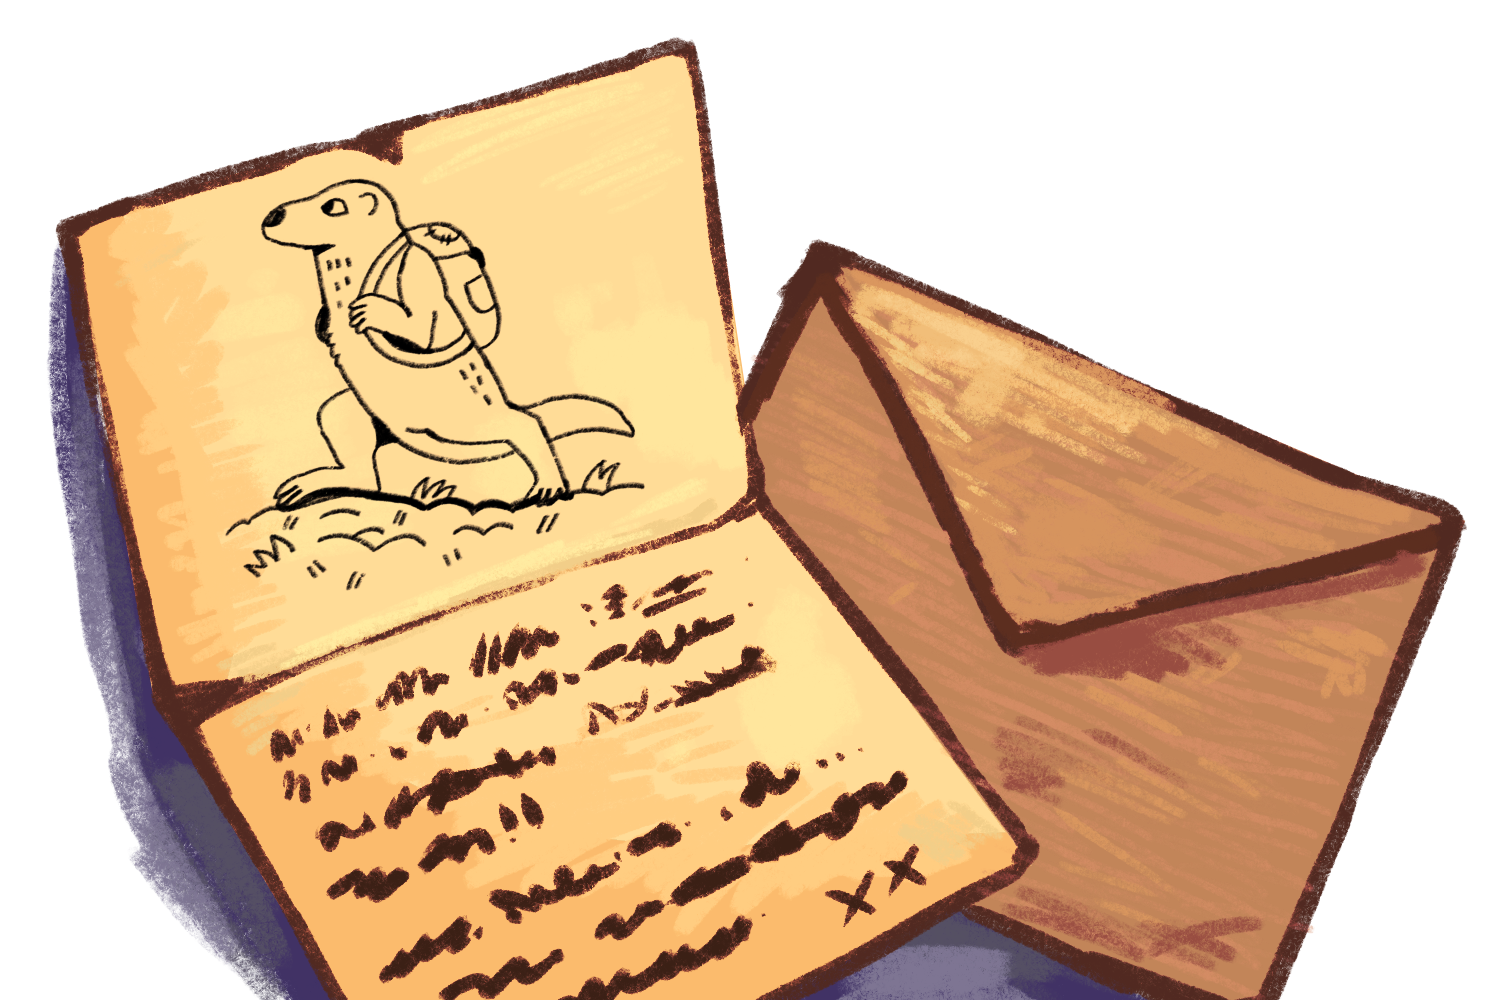 Image. A drawing of an open letter laid on a closed envelope. The letter has an illustration of a hiking beast.